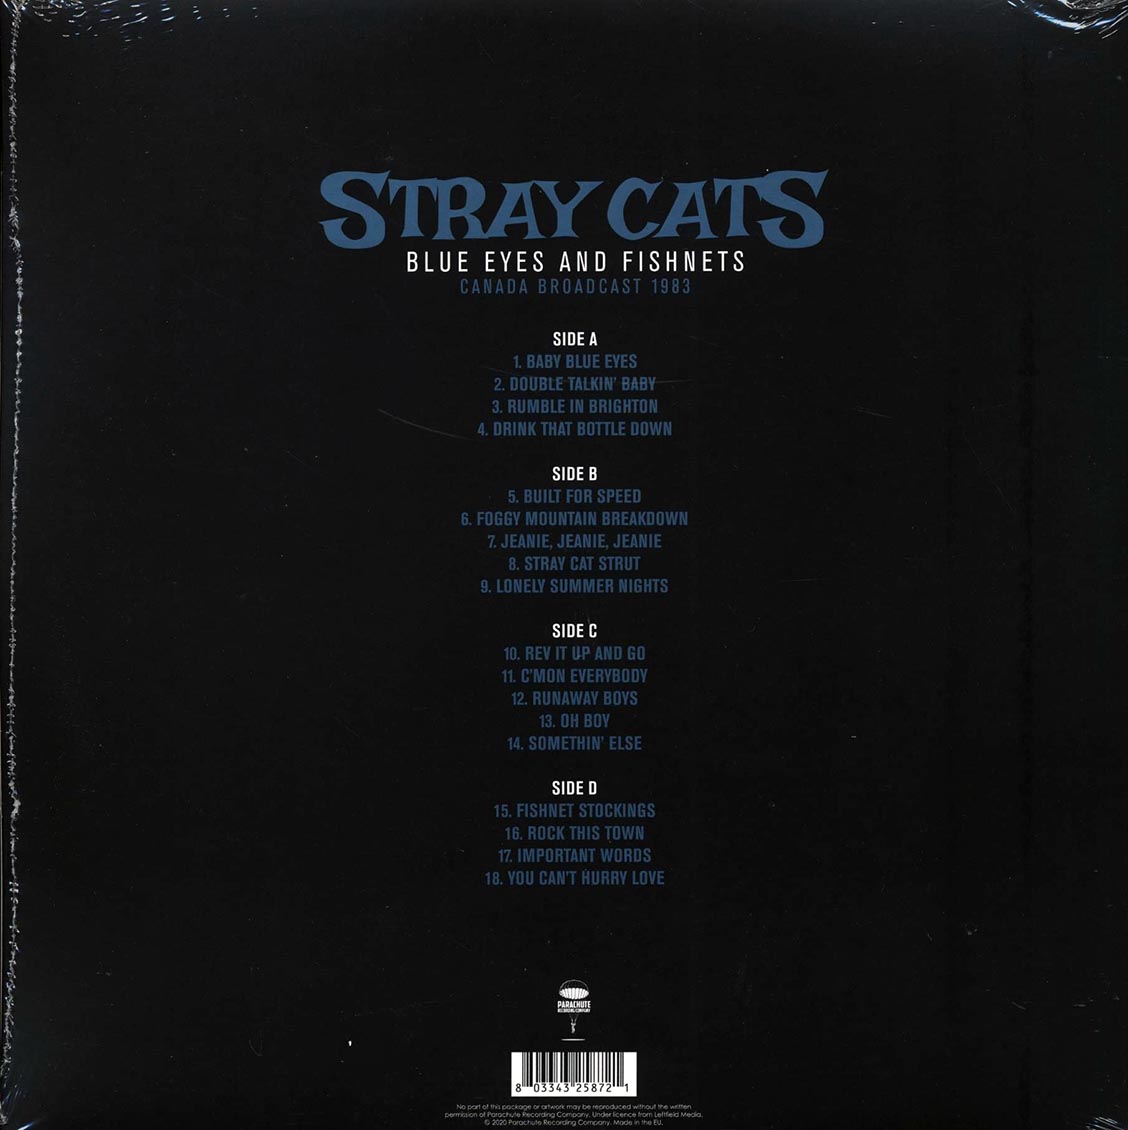 Stray Cats - Blue Eyes And Fishnets: Canada Broadcast 1983 (2xLP) - Vinyl LP, LP